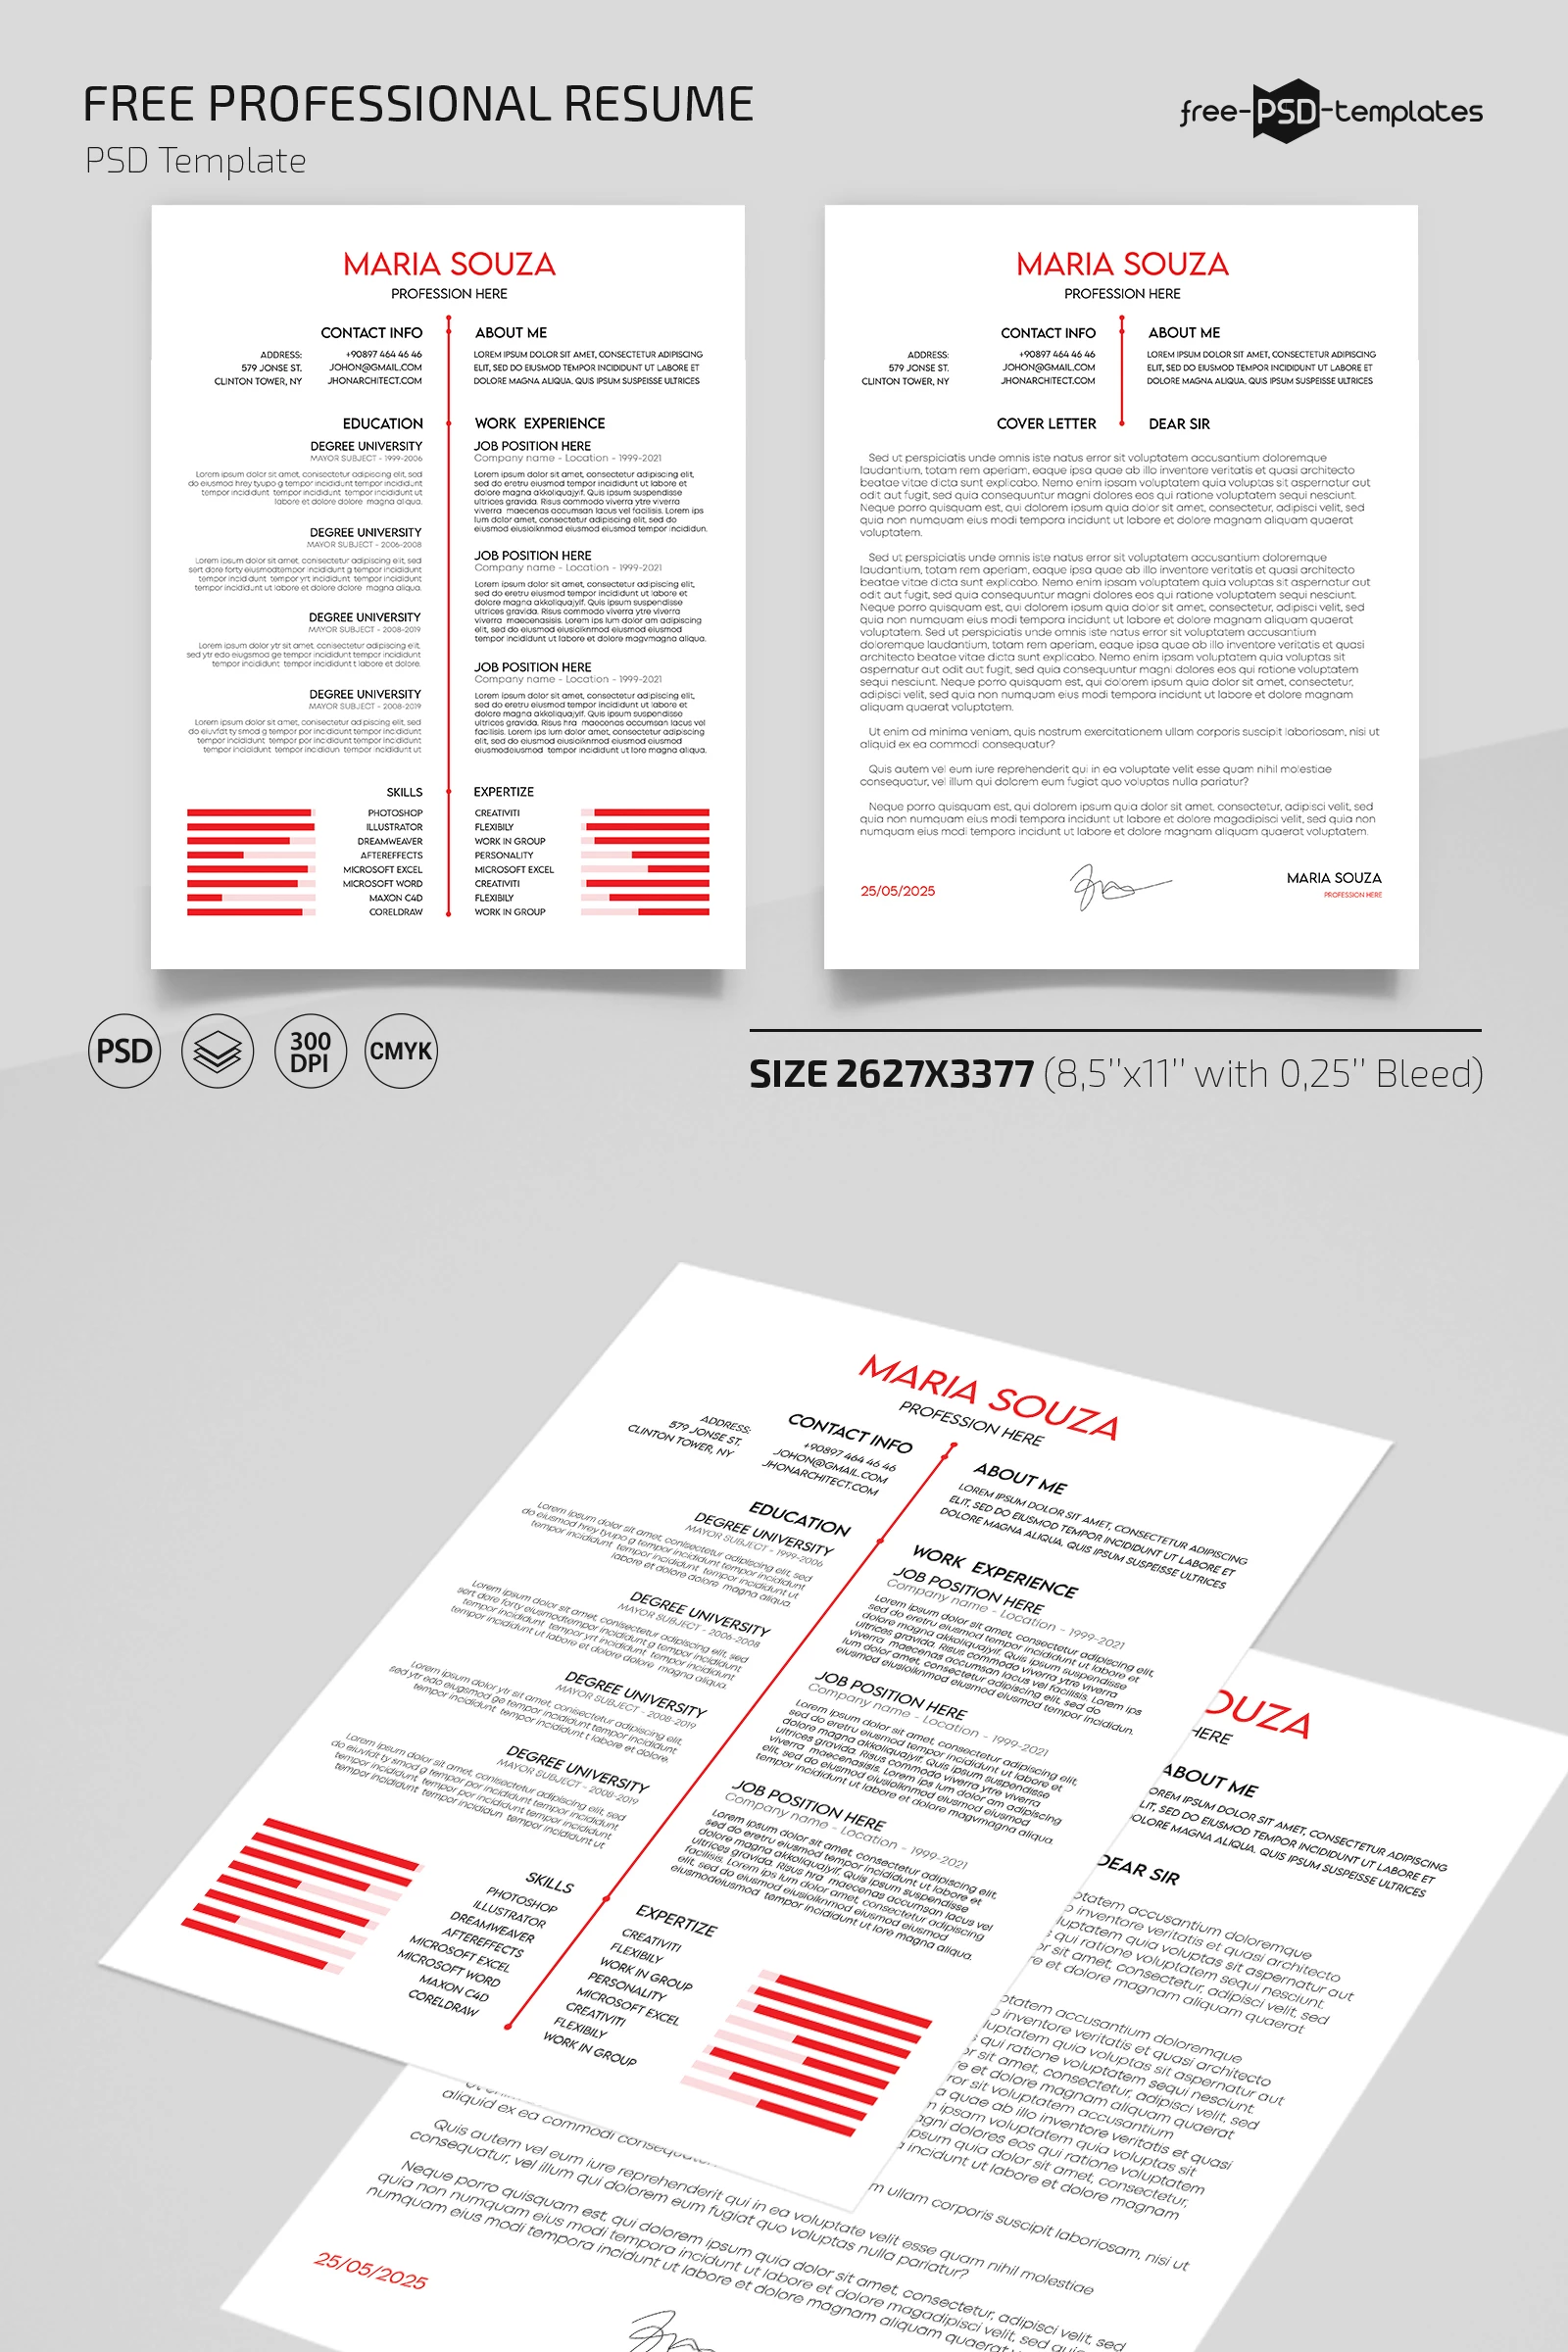 Free Professional Resume Template in PSD